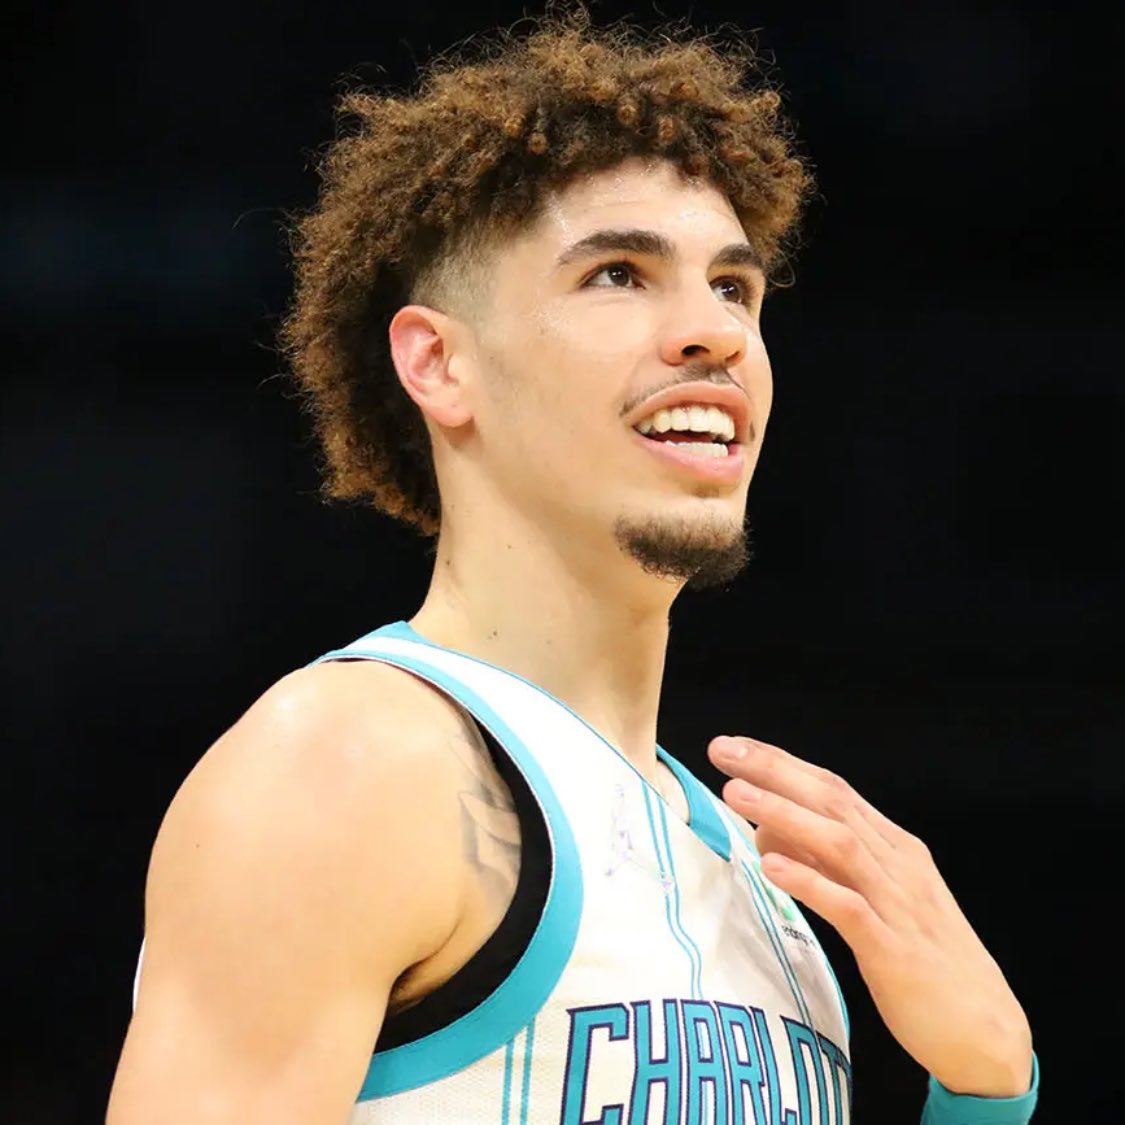 LaMelo Ball has 28 Points, 8 Rebounds, 5 Assists, 53% FG, 6/8 3PM in 22 Min...